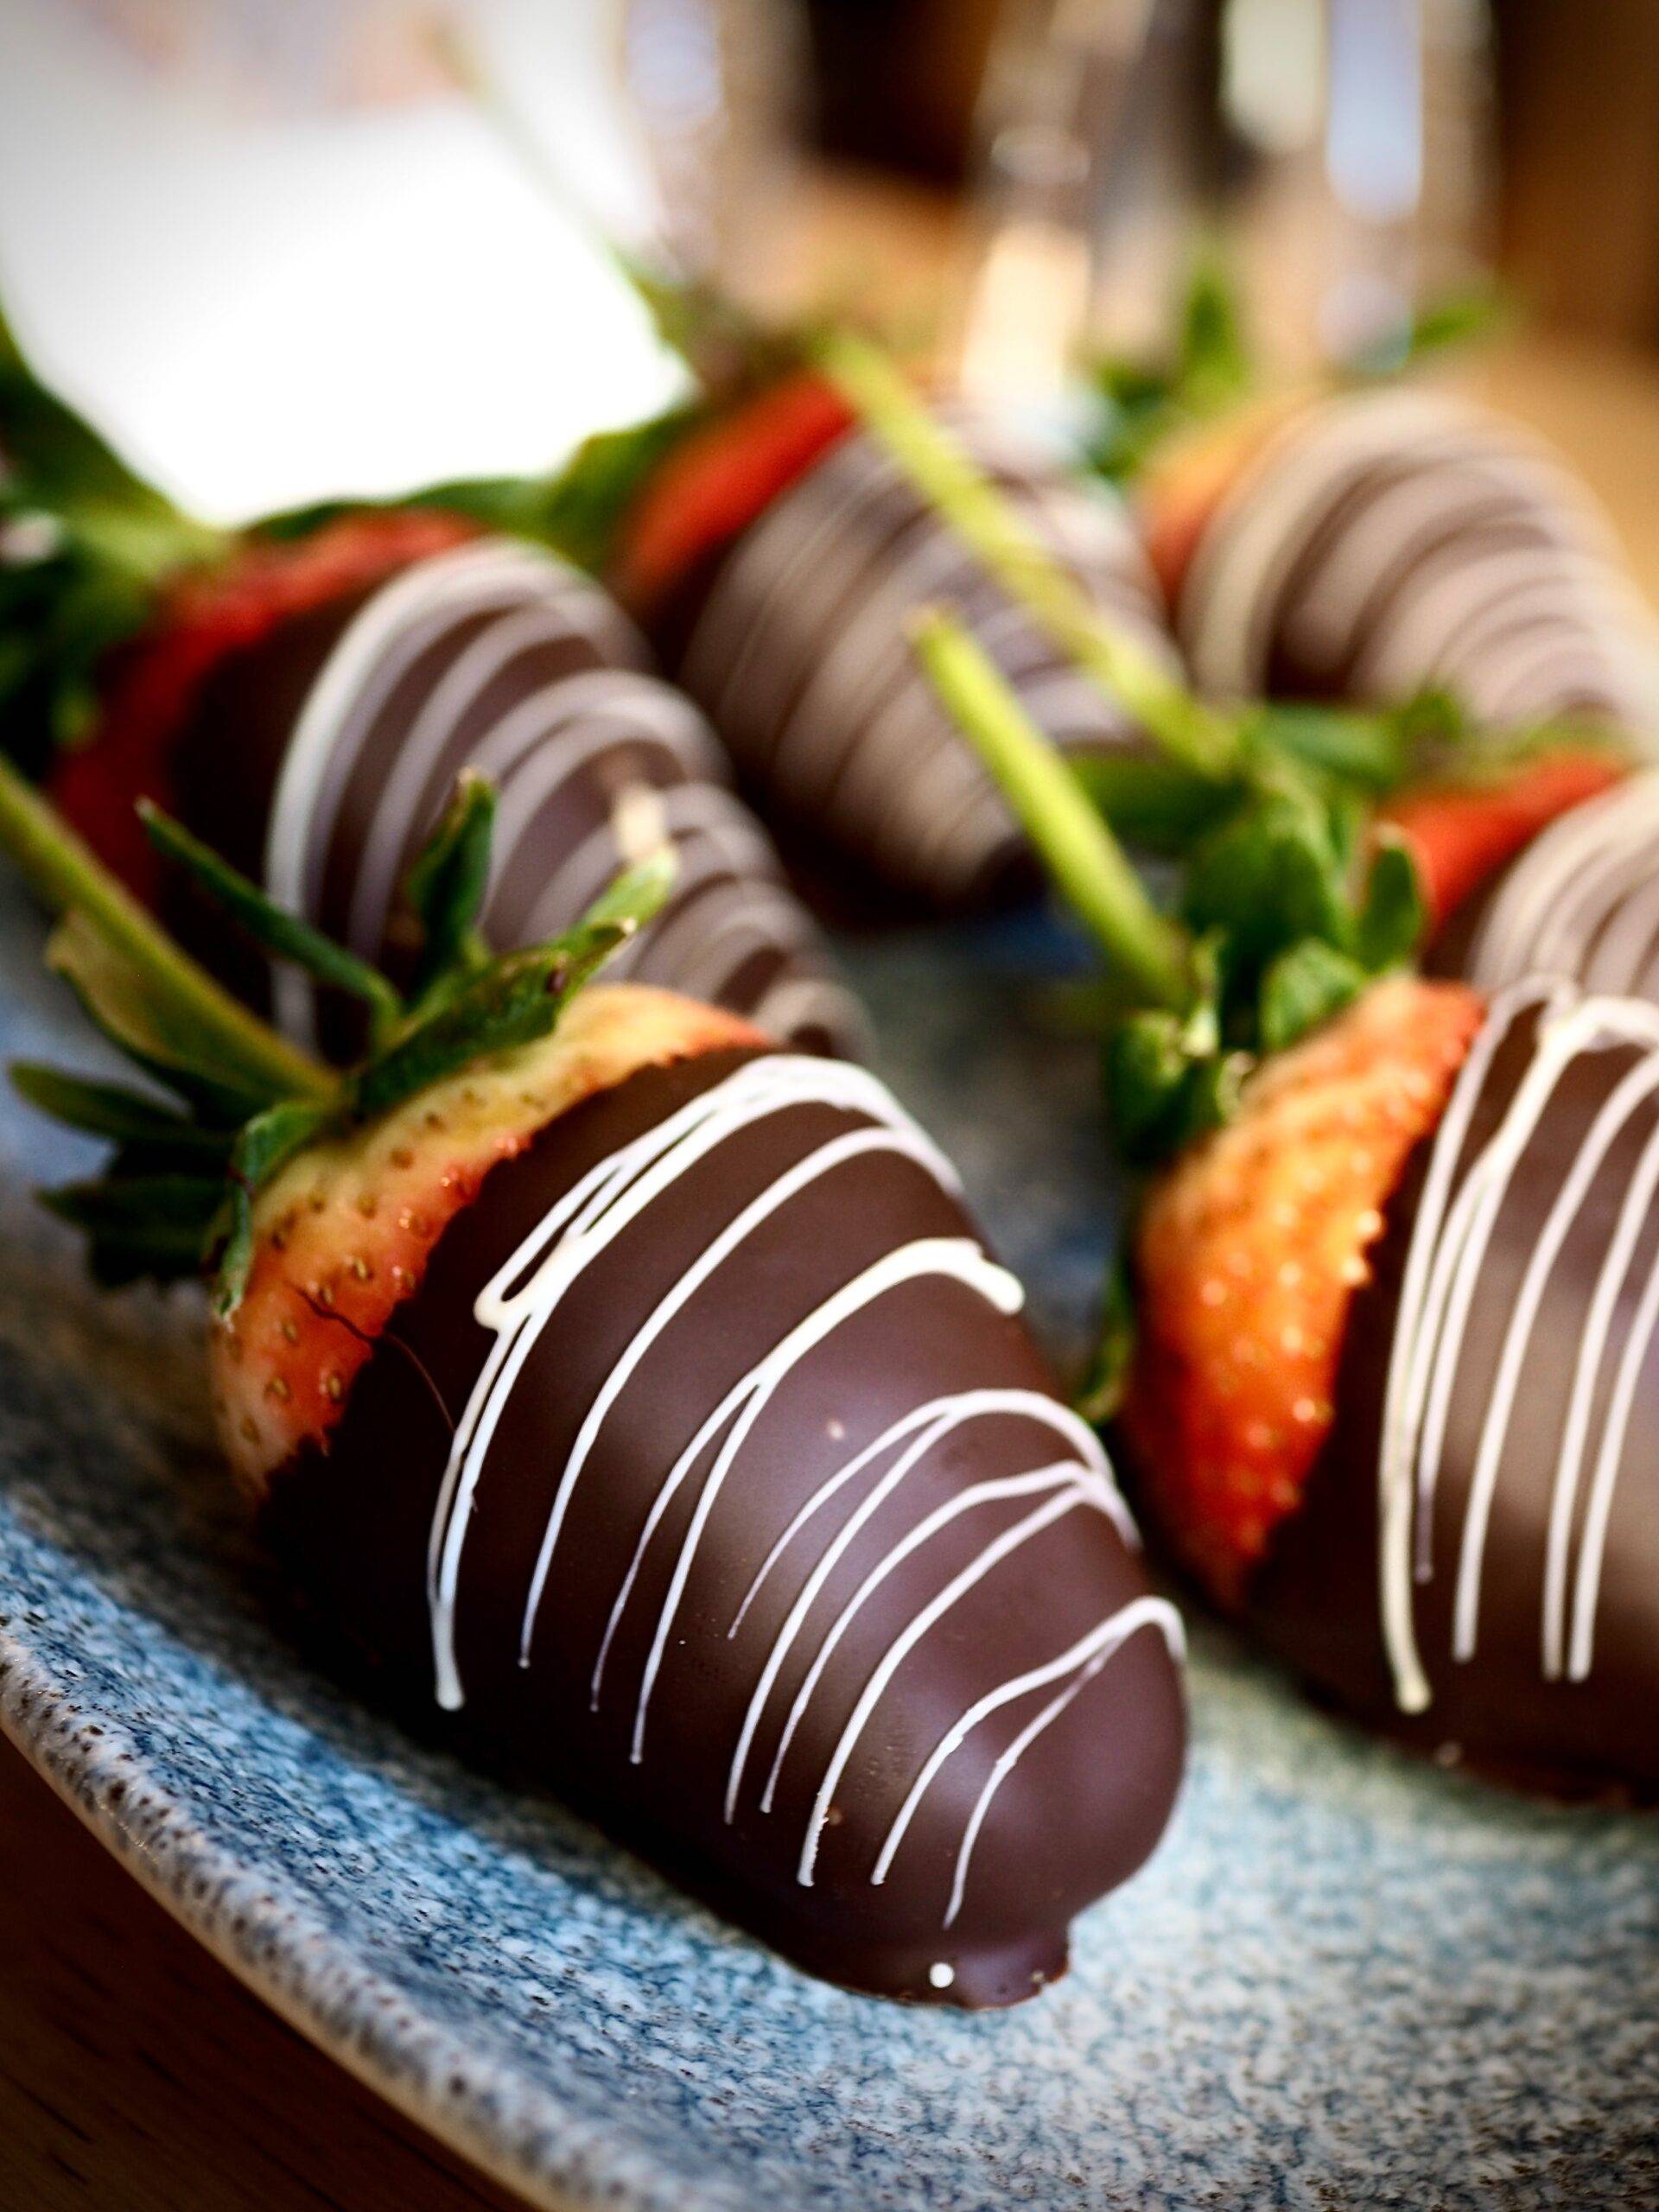 Chocolate Covered Strawberries: The Best Delectable Romance of Flavors